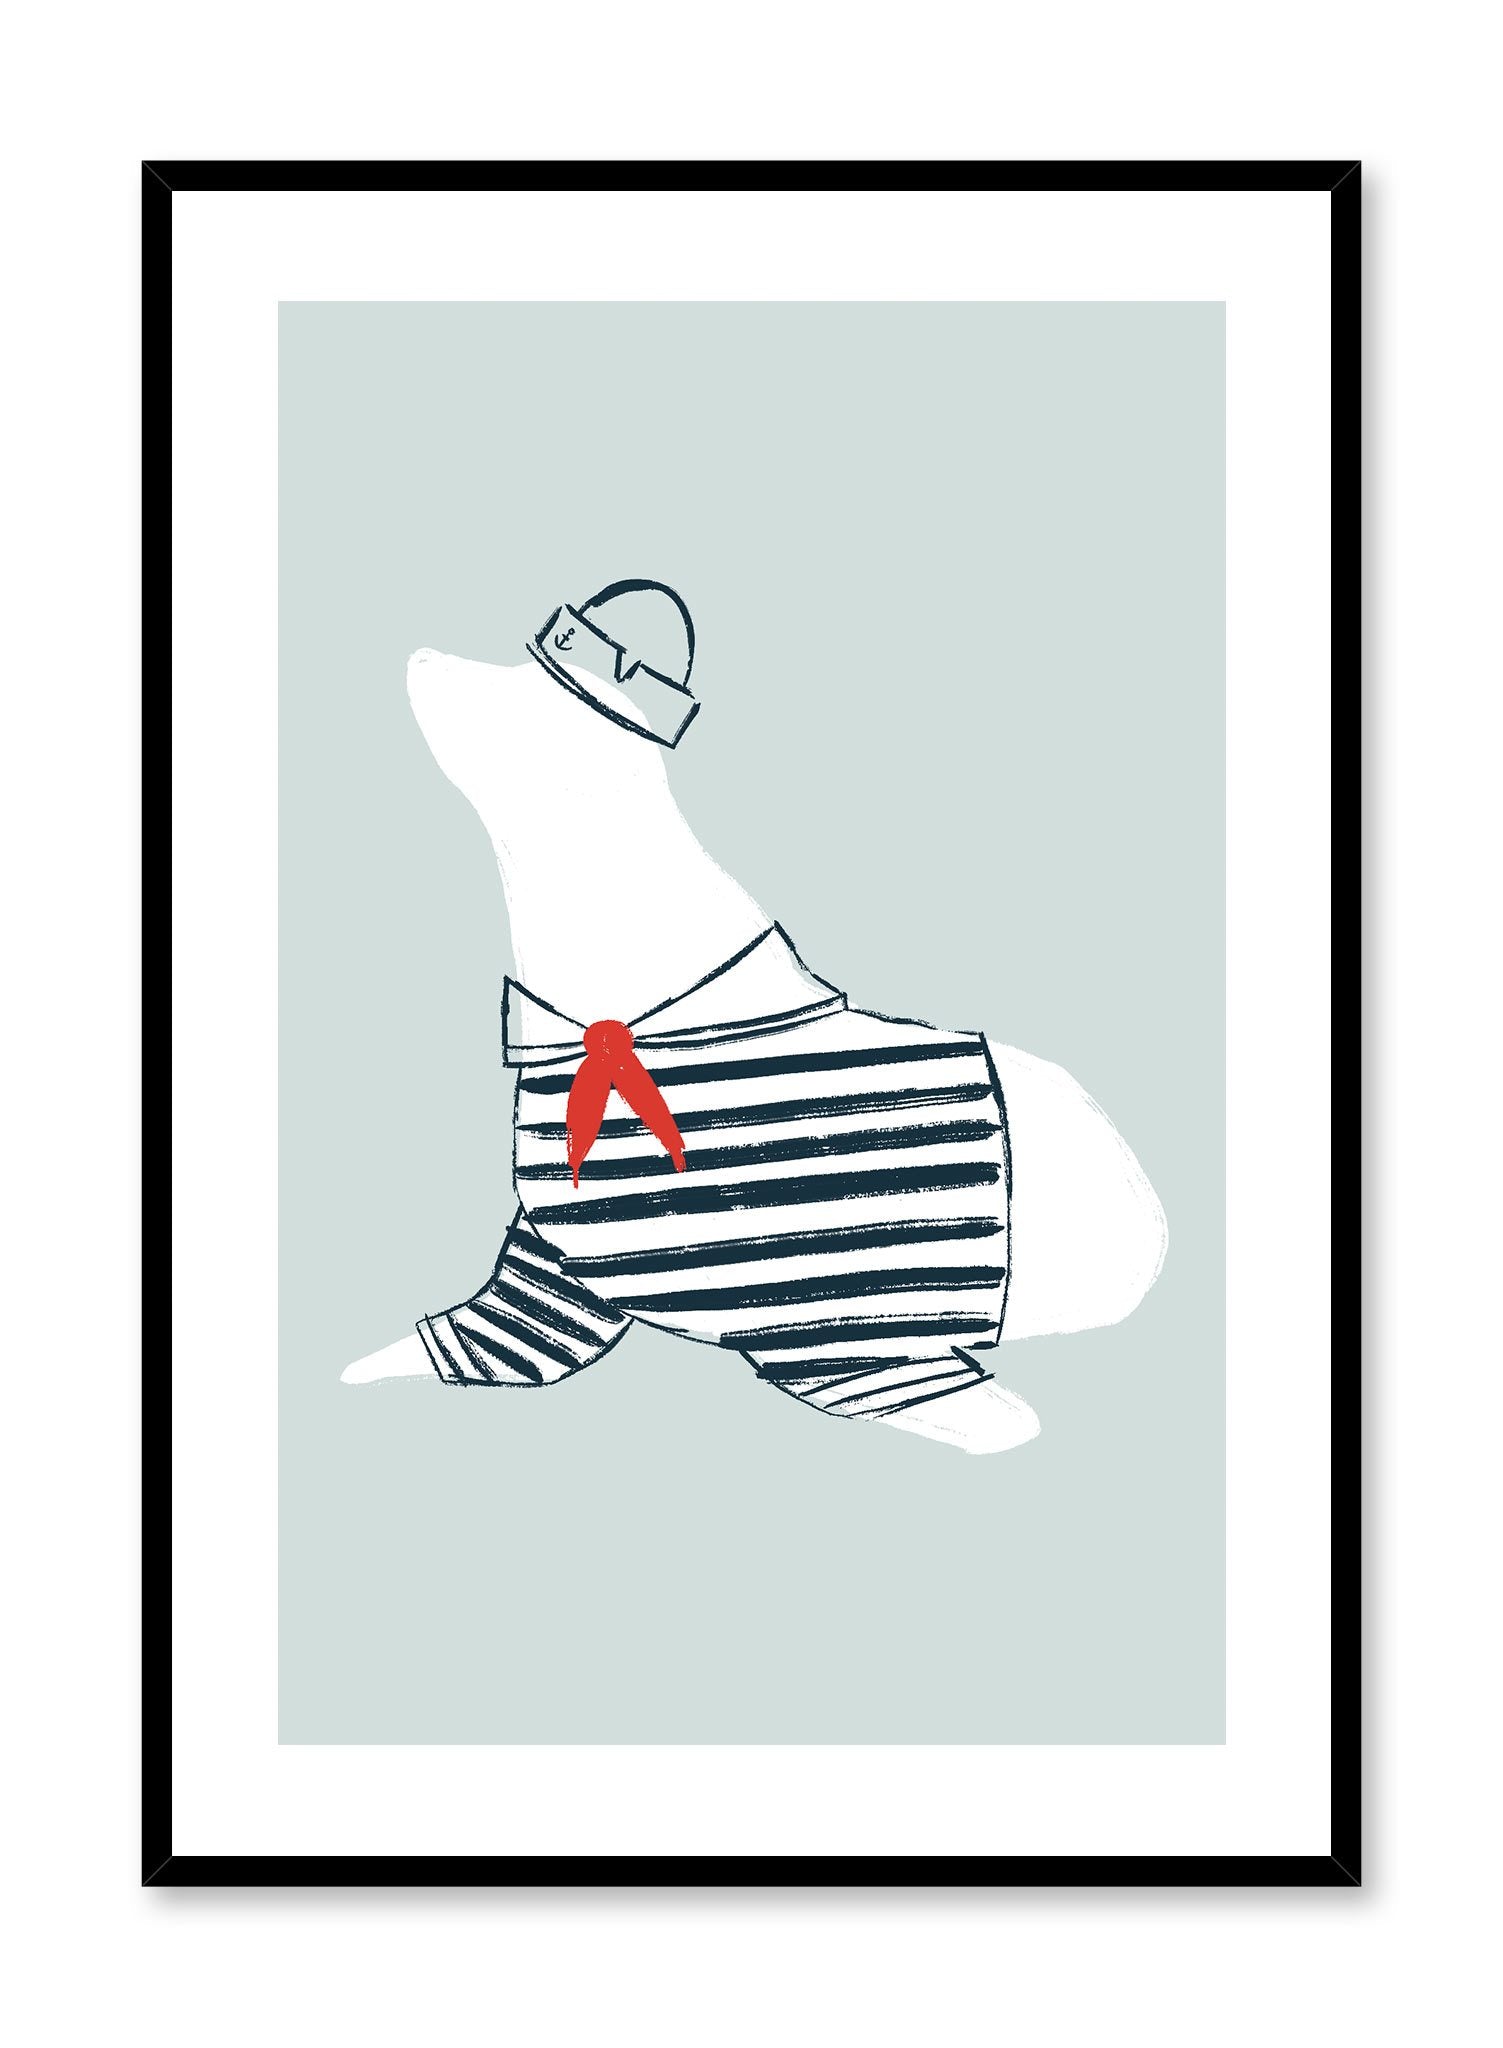 Seal Sailor is a minimalist illustration of white seal wearing a dark blue sailor outfit with a matching Dixie cup hat and a red scarf by Opposite Wall.